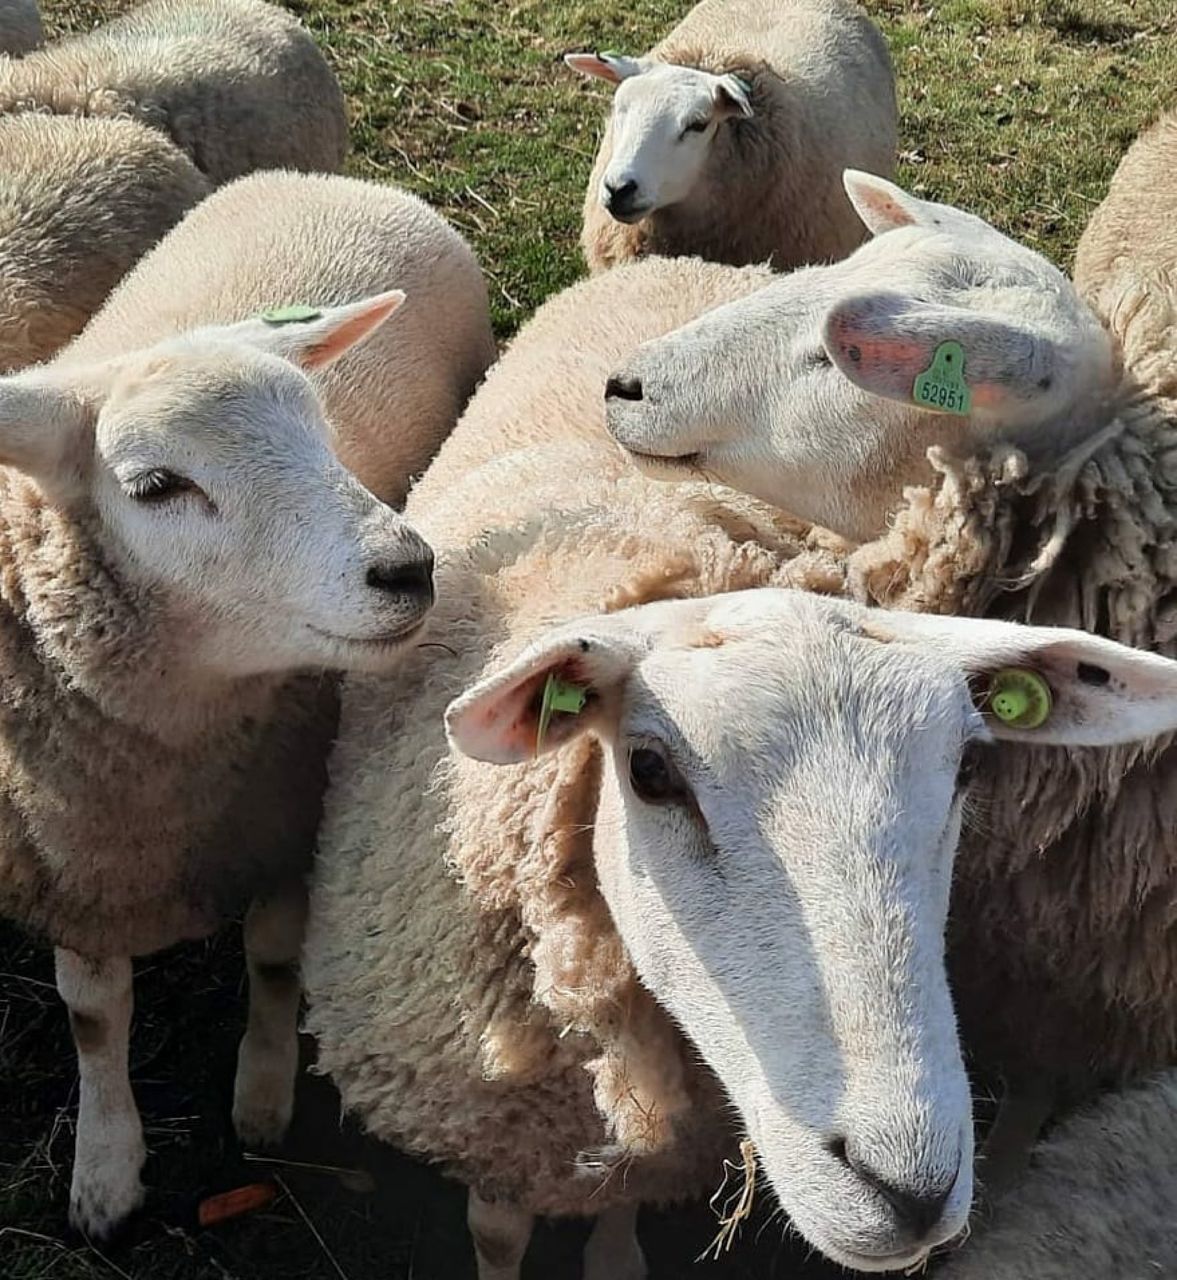 CLOSE-UP OF SHEEP IN A FIELD